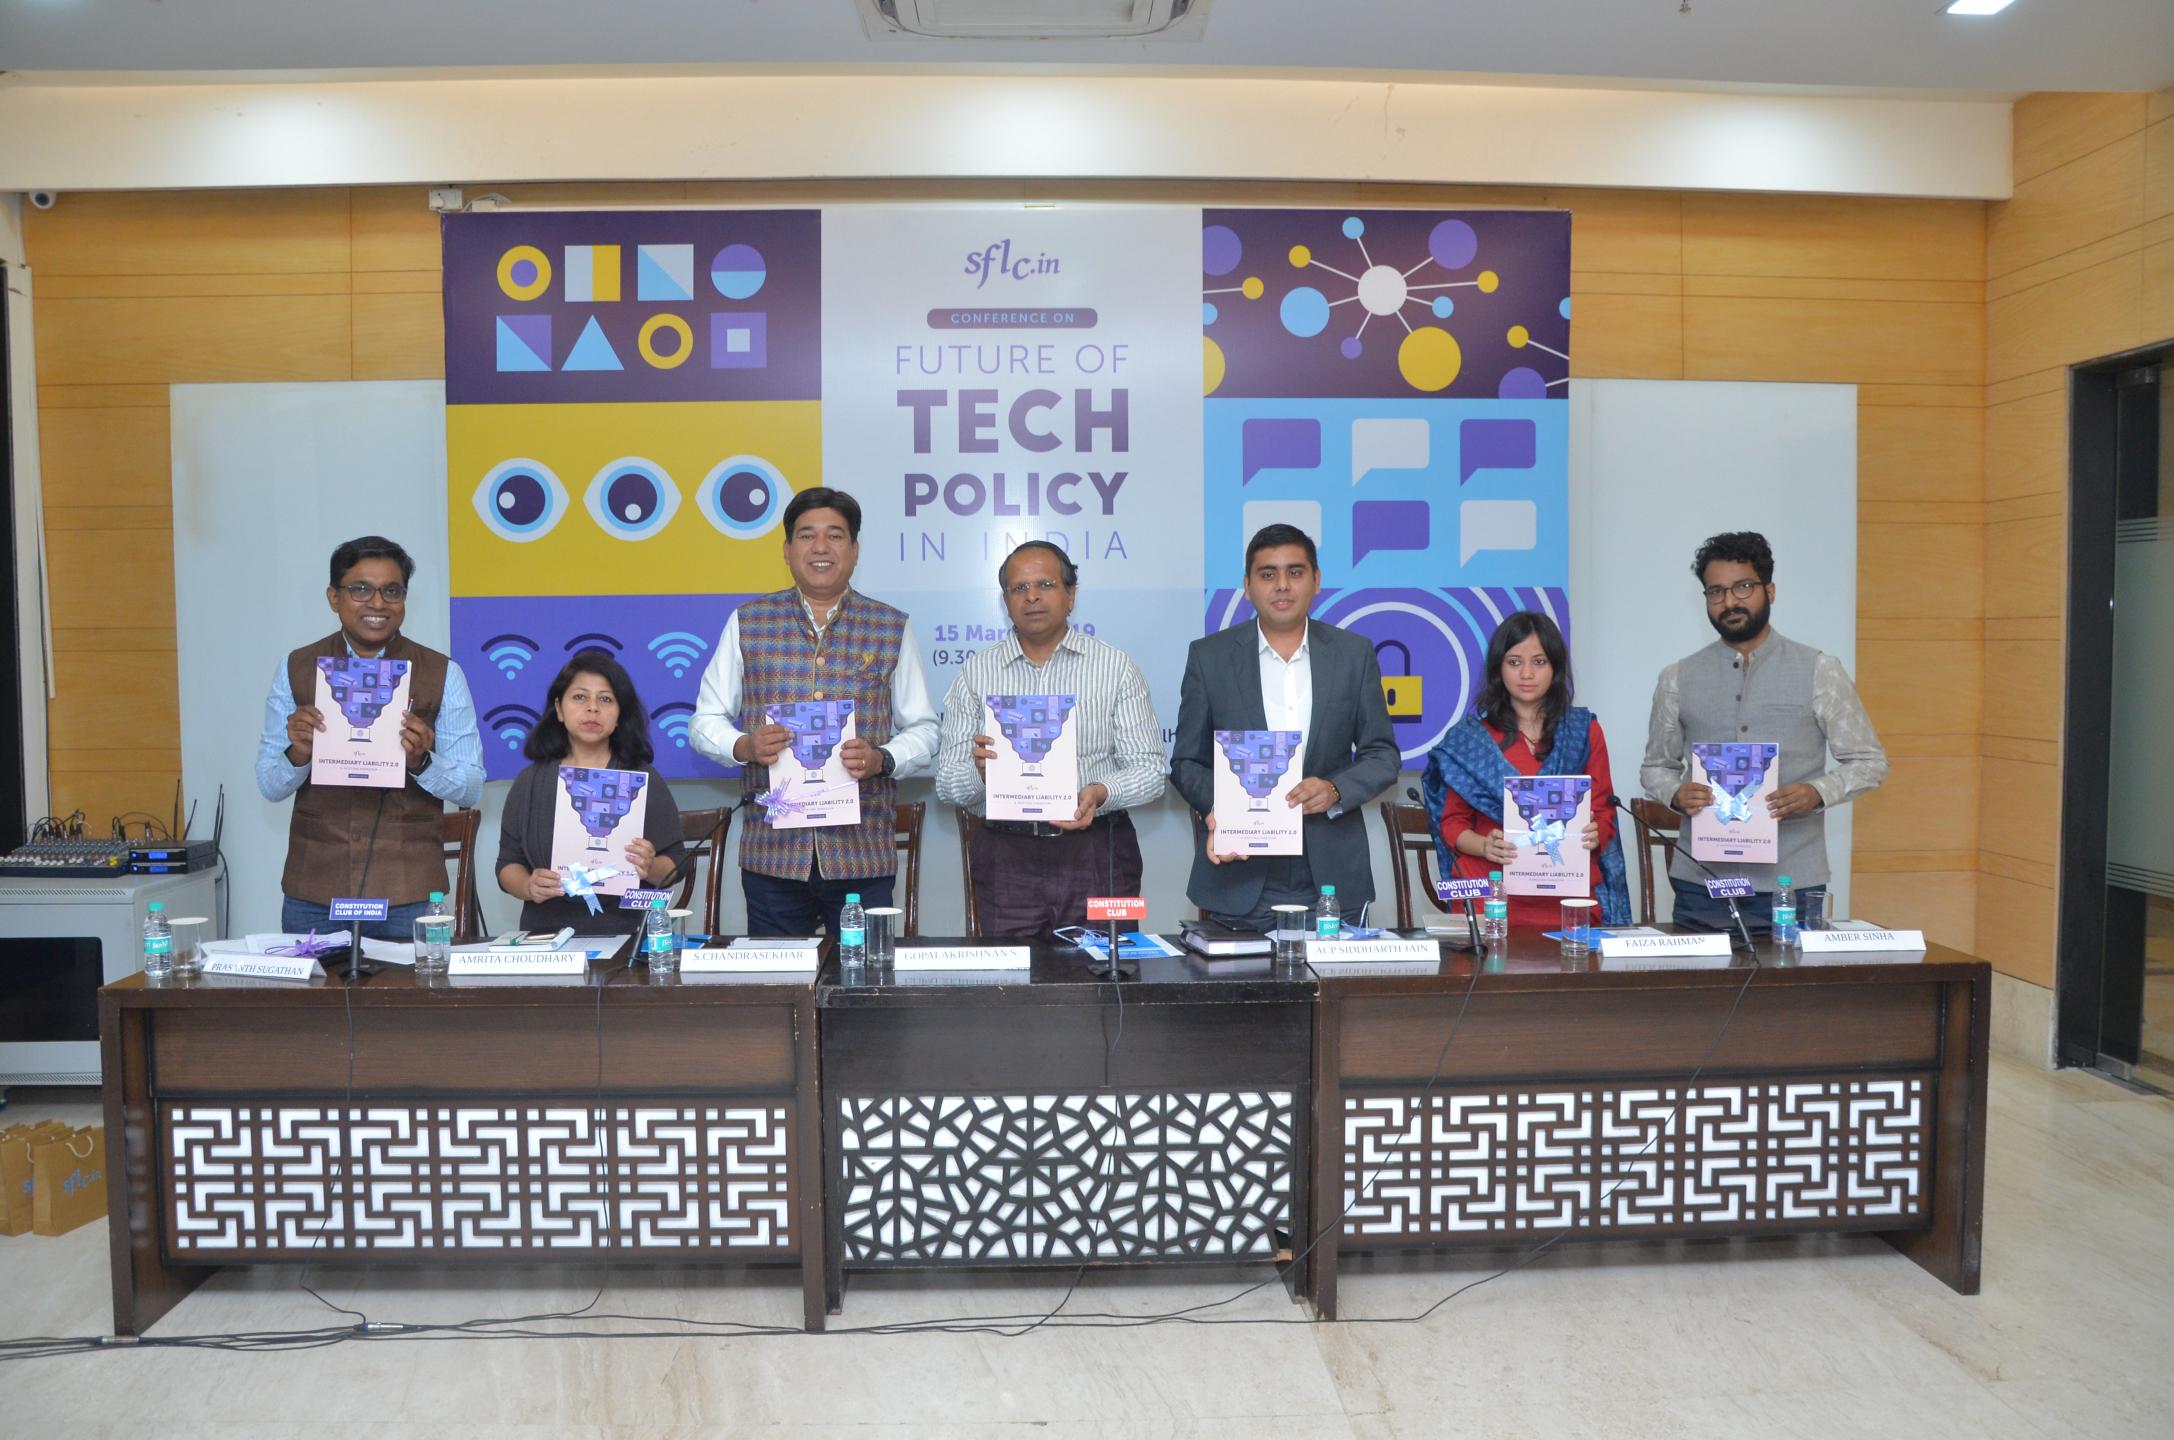 Blue Paper – Conference on Future of Tech Policy in India